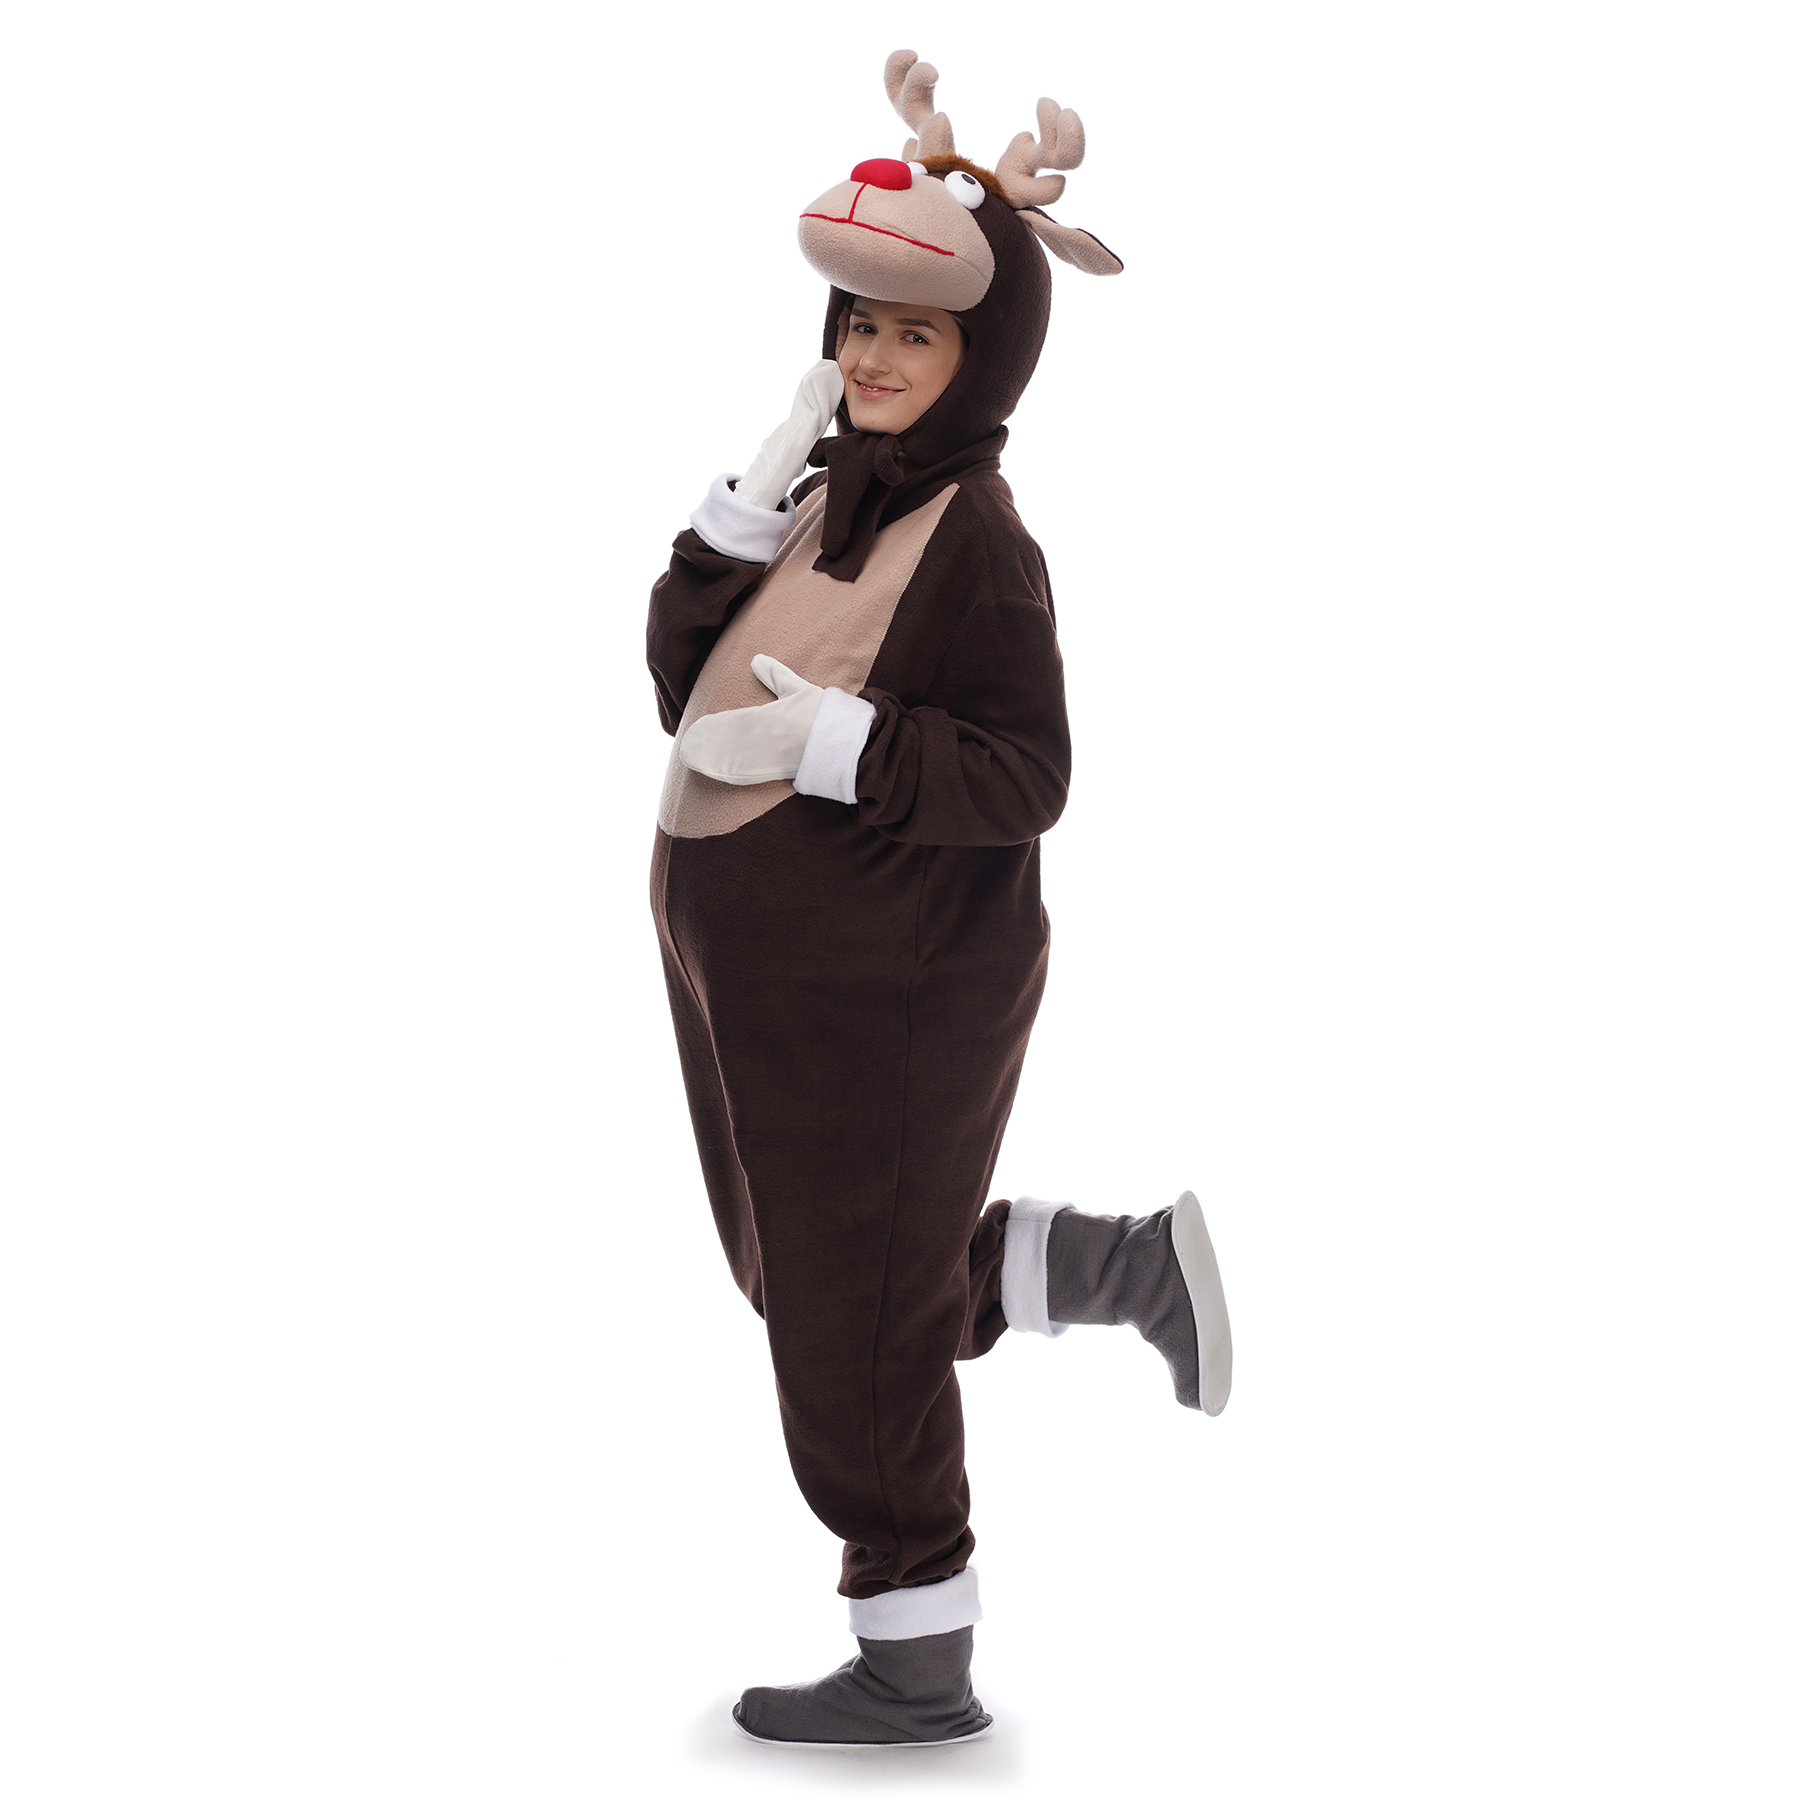 Costume Christmas Reindeer Rudolph (shipping to the USA only)